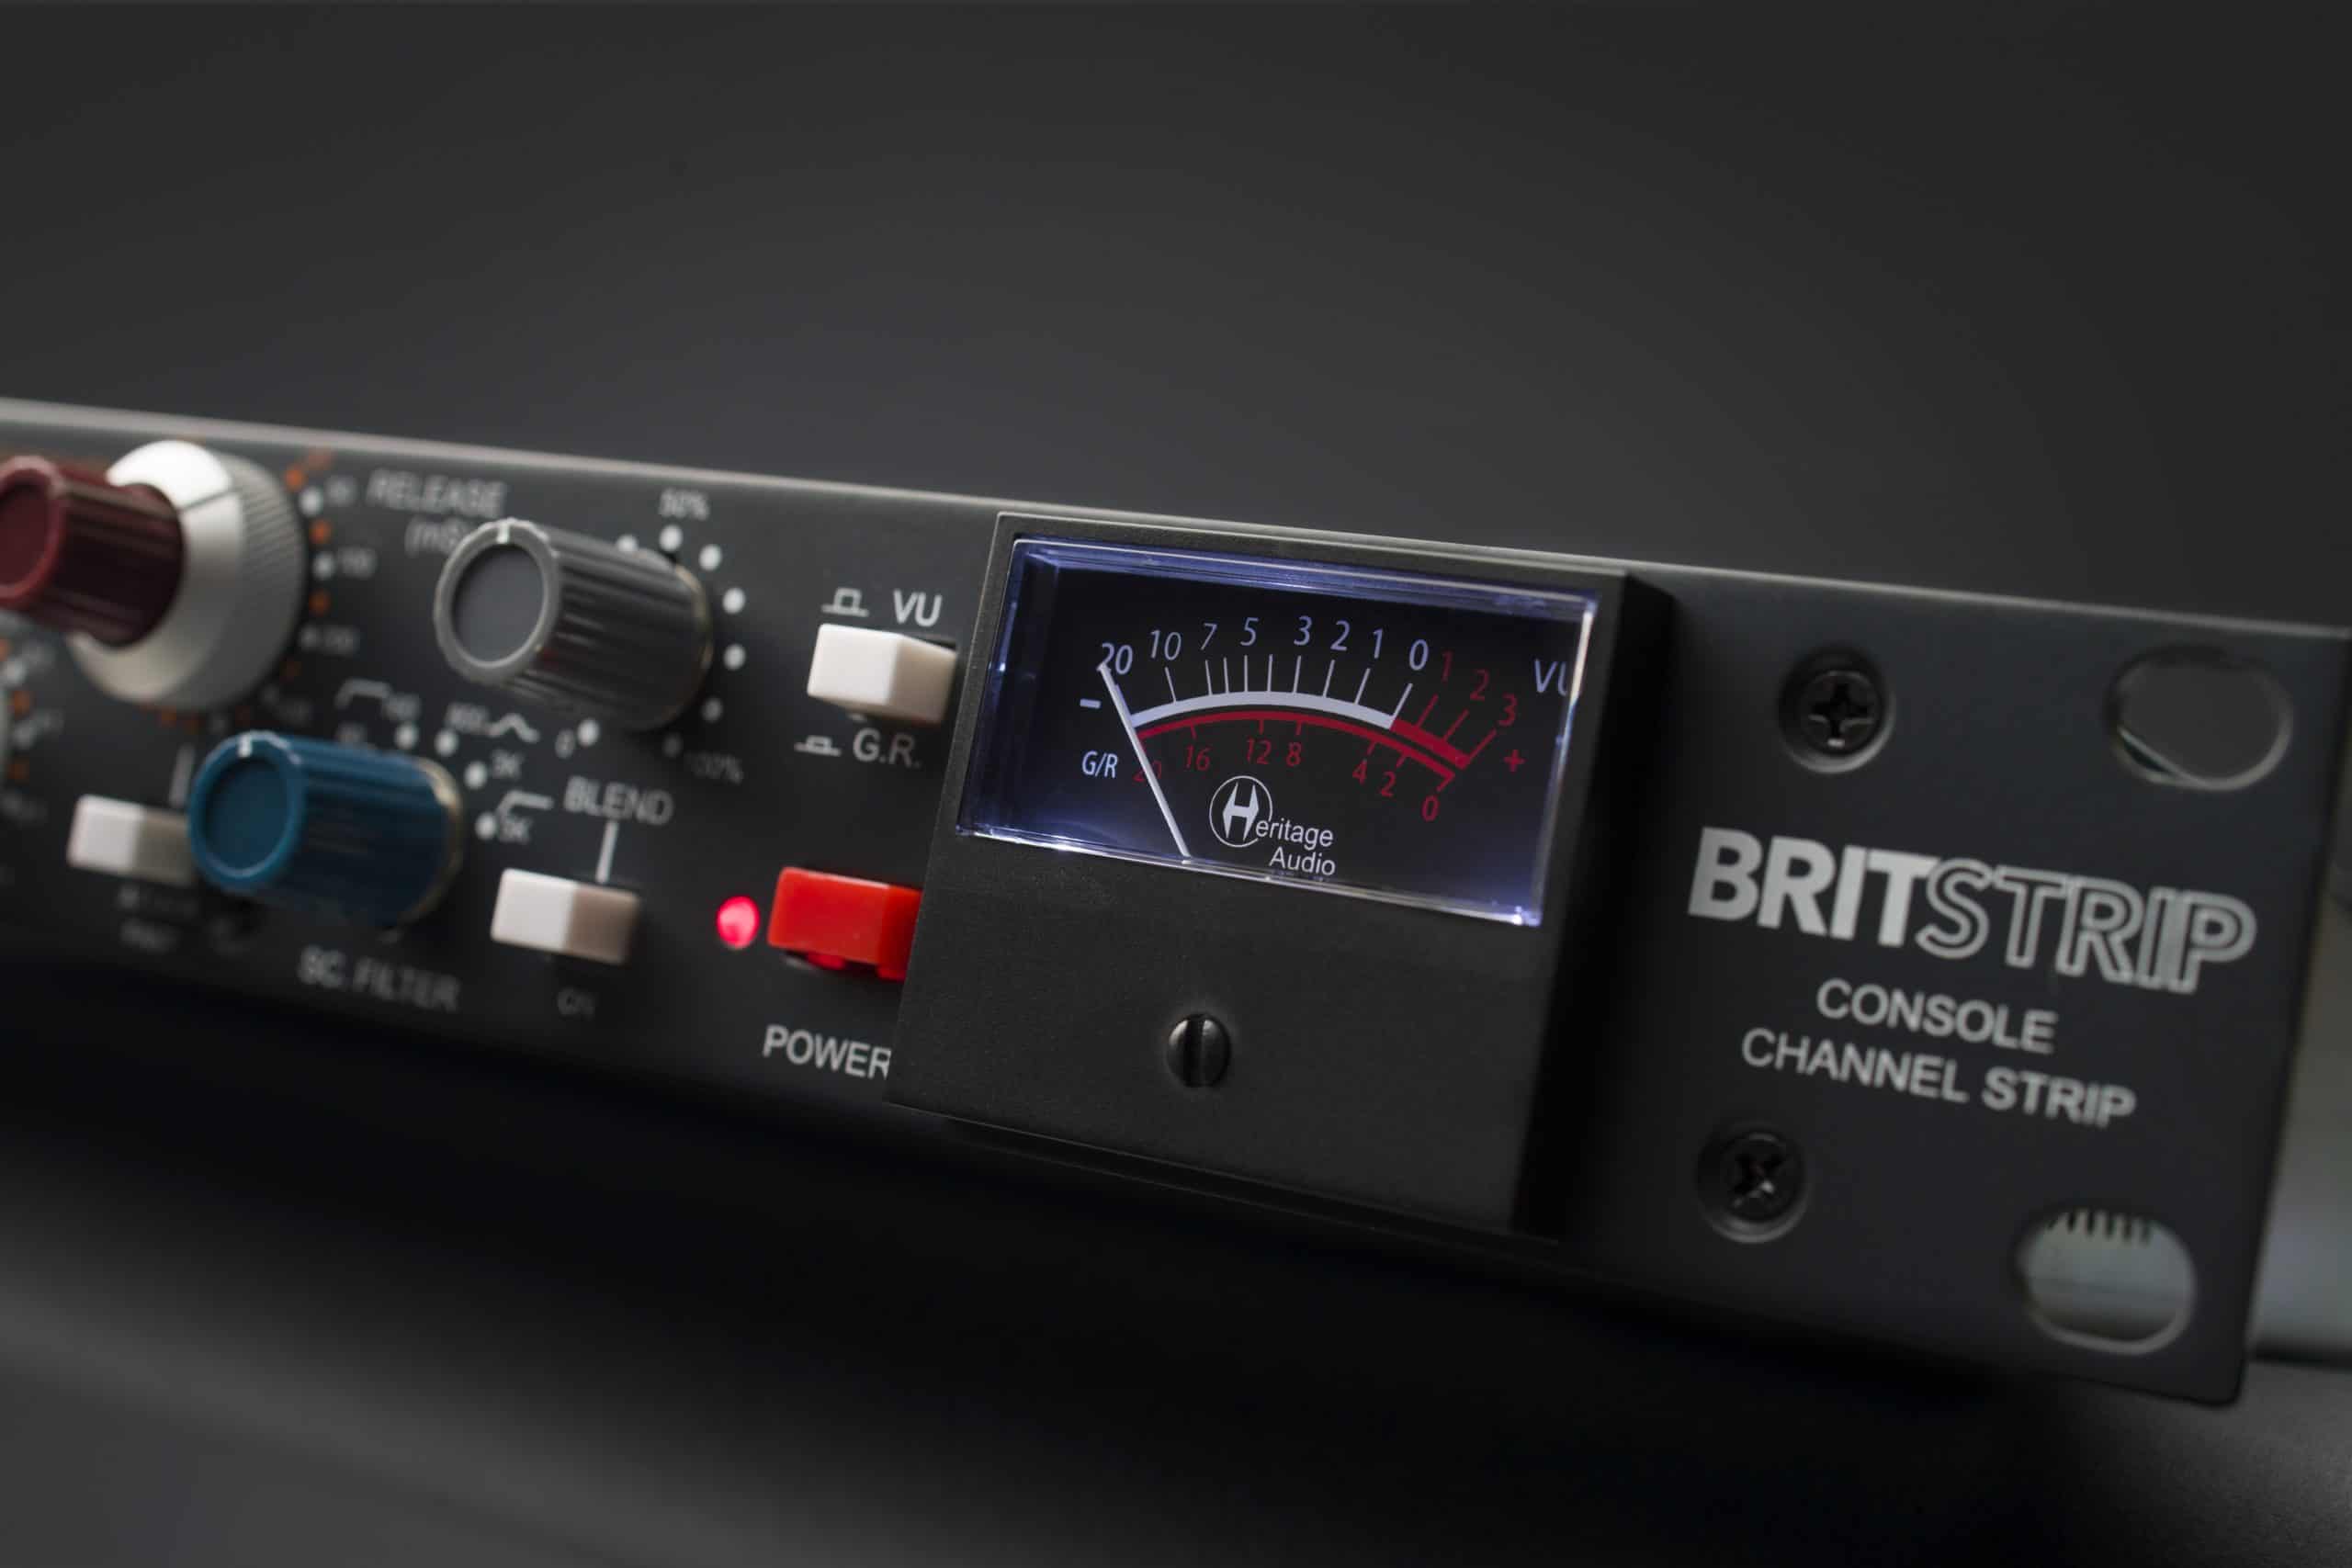 Heritage Audio Released BritStrip Console Channel Strip with Successor-Like Compressor